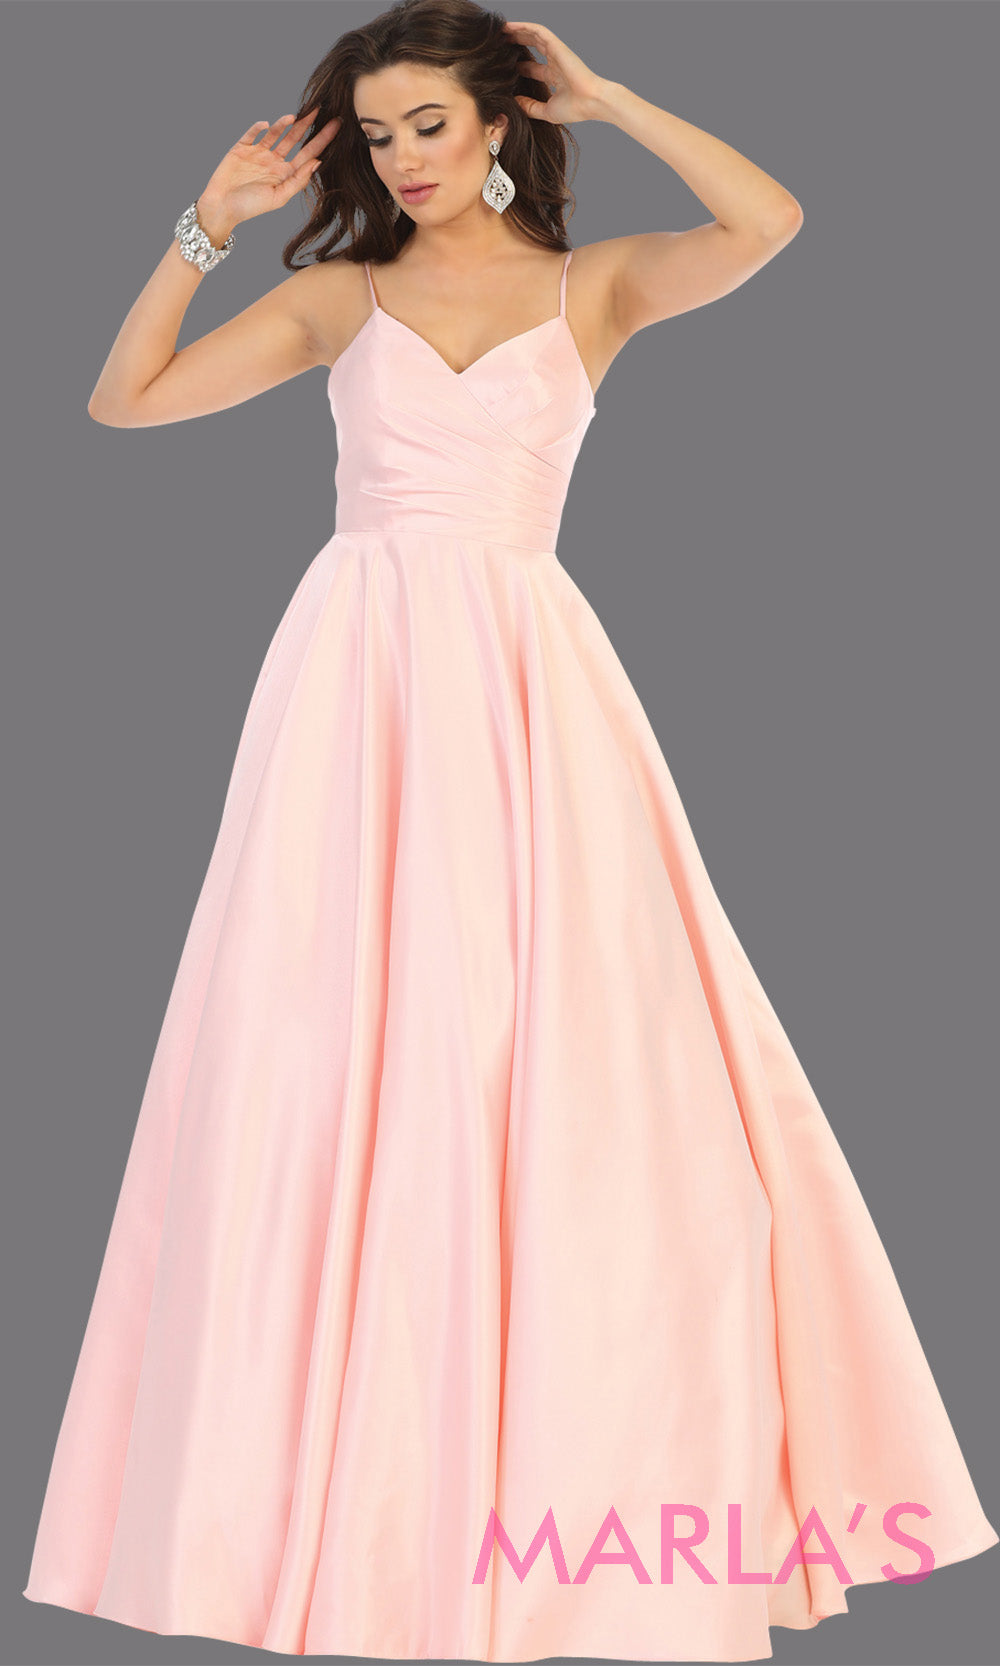 Long simple v neck blush pink satin semi ballgown with pockets. This light pink flowy gown from mayqueen is perfect for prom, black tie event, engagement dress, formal party dress, plus size wedding guest dresses, pink indowestern party dress